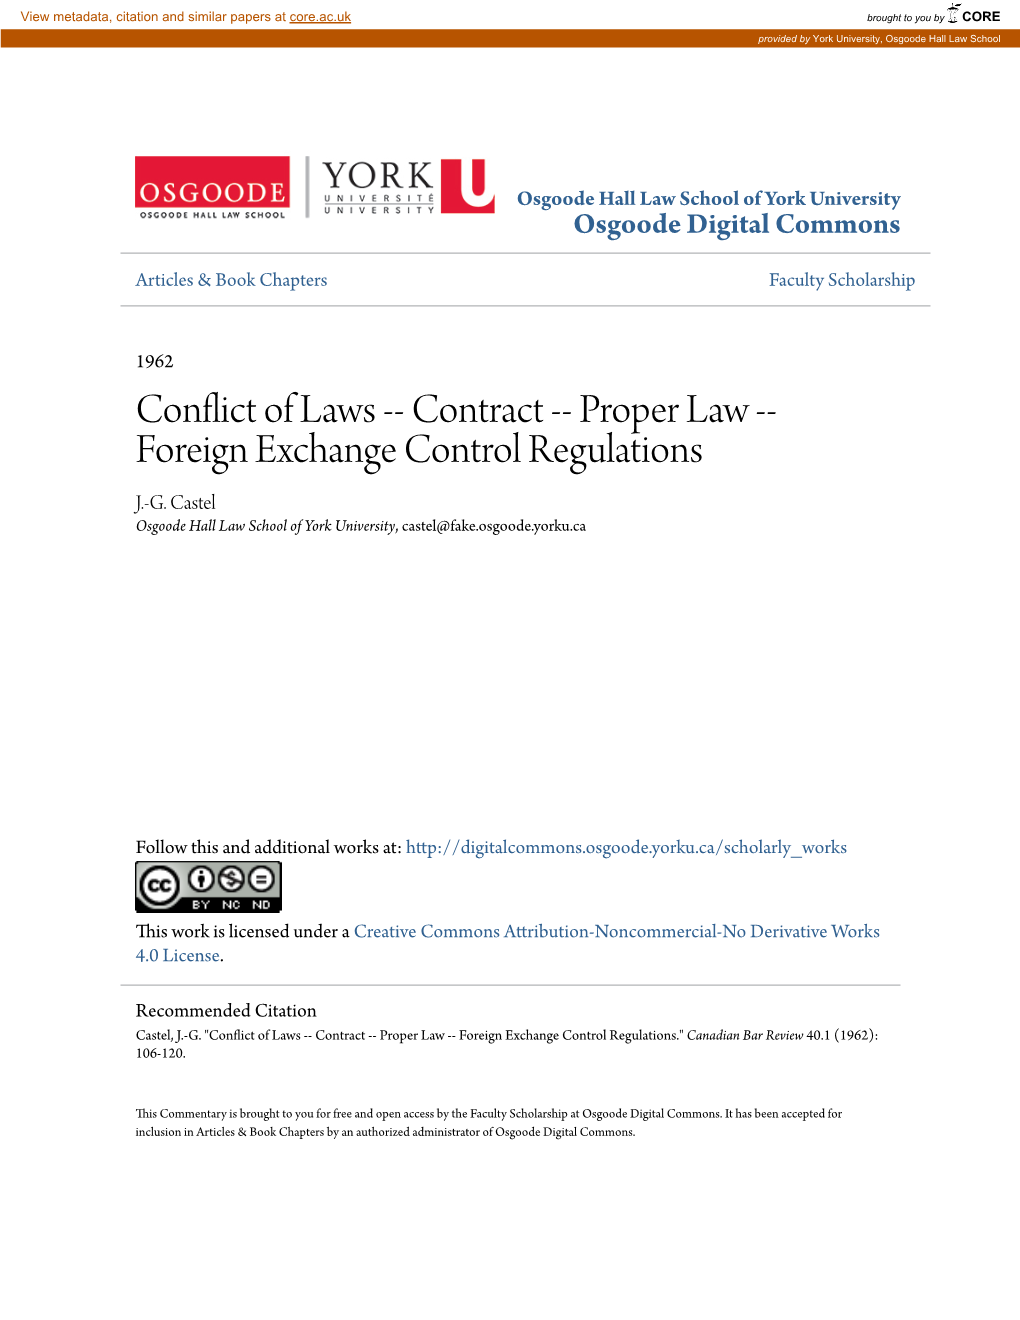 Contract -- Proper Law -- Foreign Exchange Control Regulations J.-G